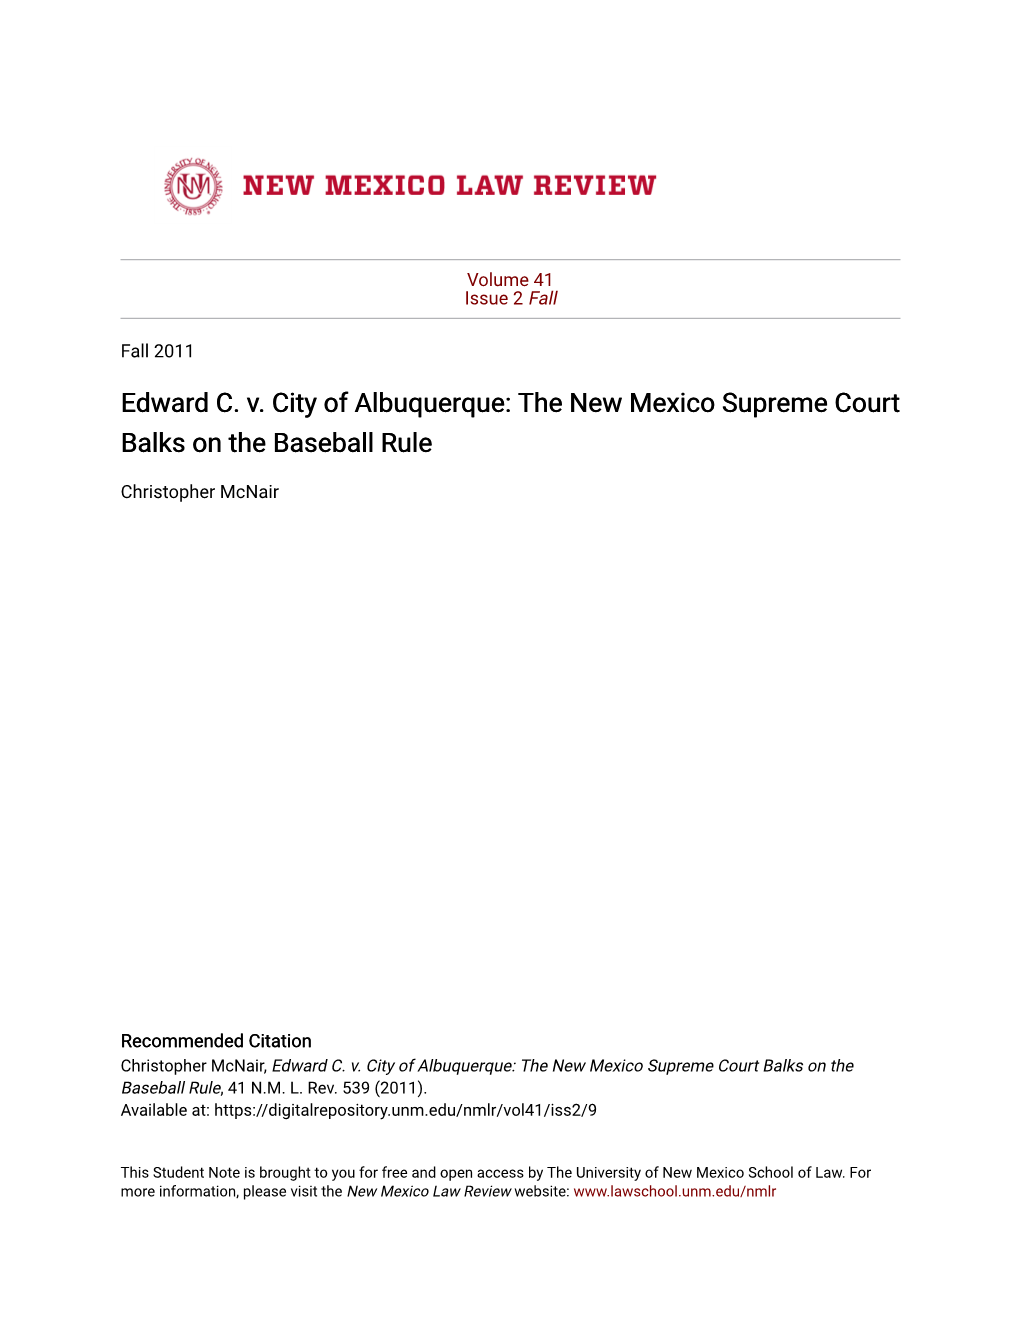 Edward C. V. City of Albuquerque: the New Mexico Supreme Court Balks on the Baseball Rule